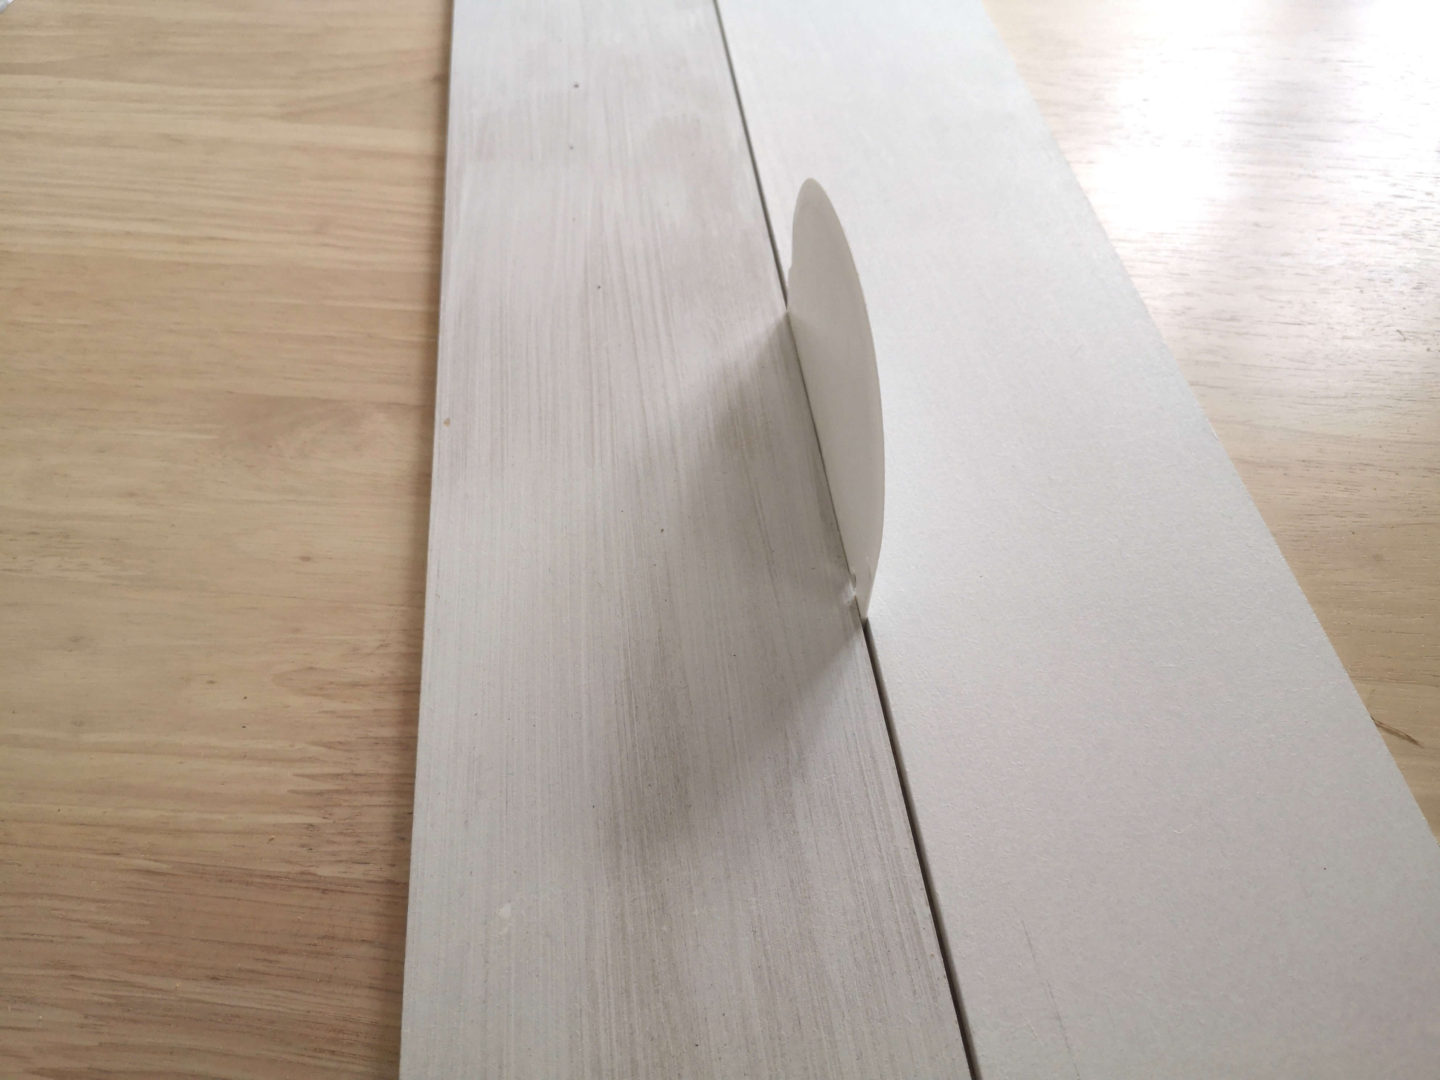 Two boards of MDF, laying on a table, with a dough scraper as a spacer between them.